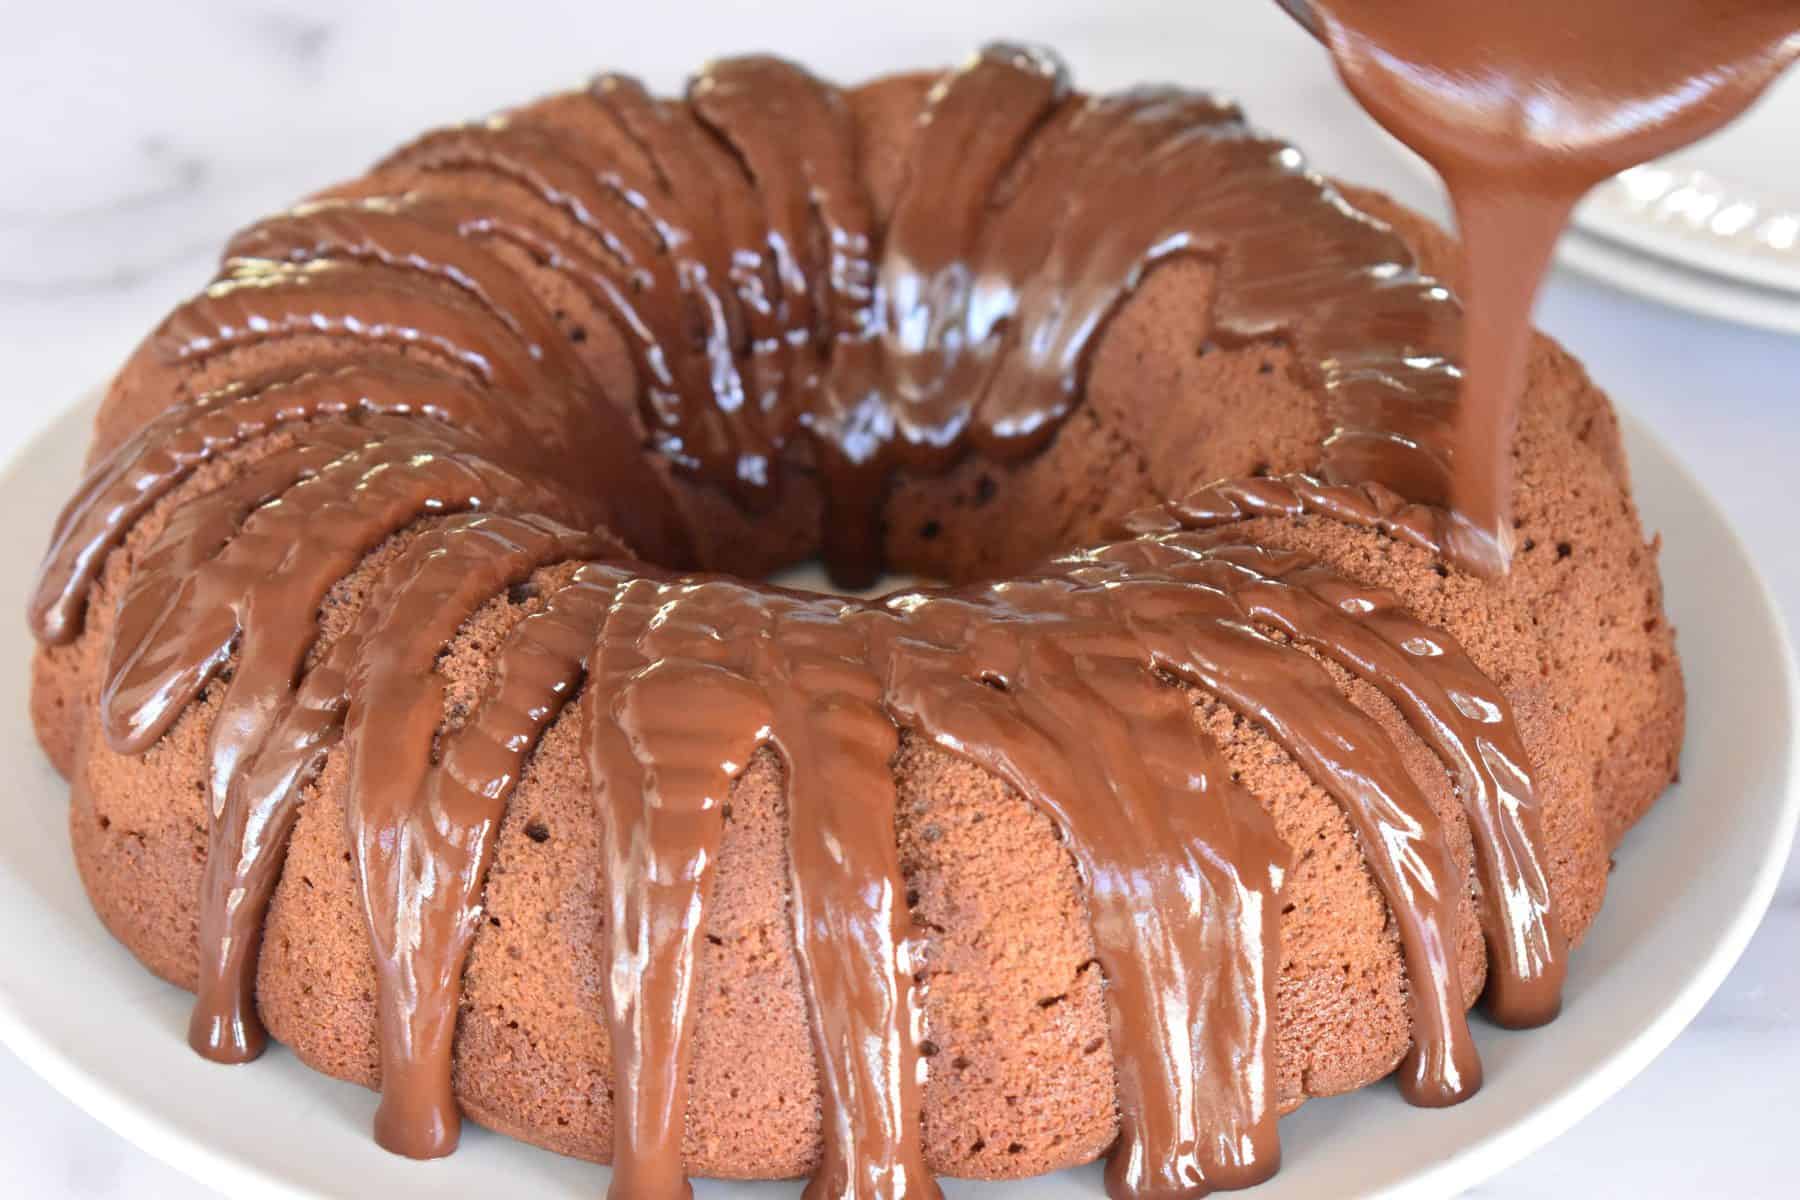 Chocolate being drizzled over the chocolate ricotta bundt cake. 